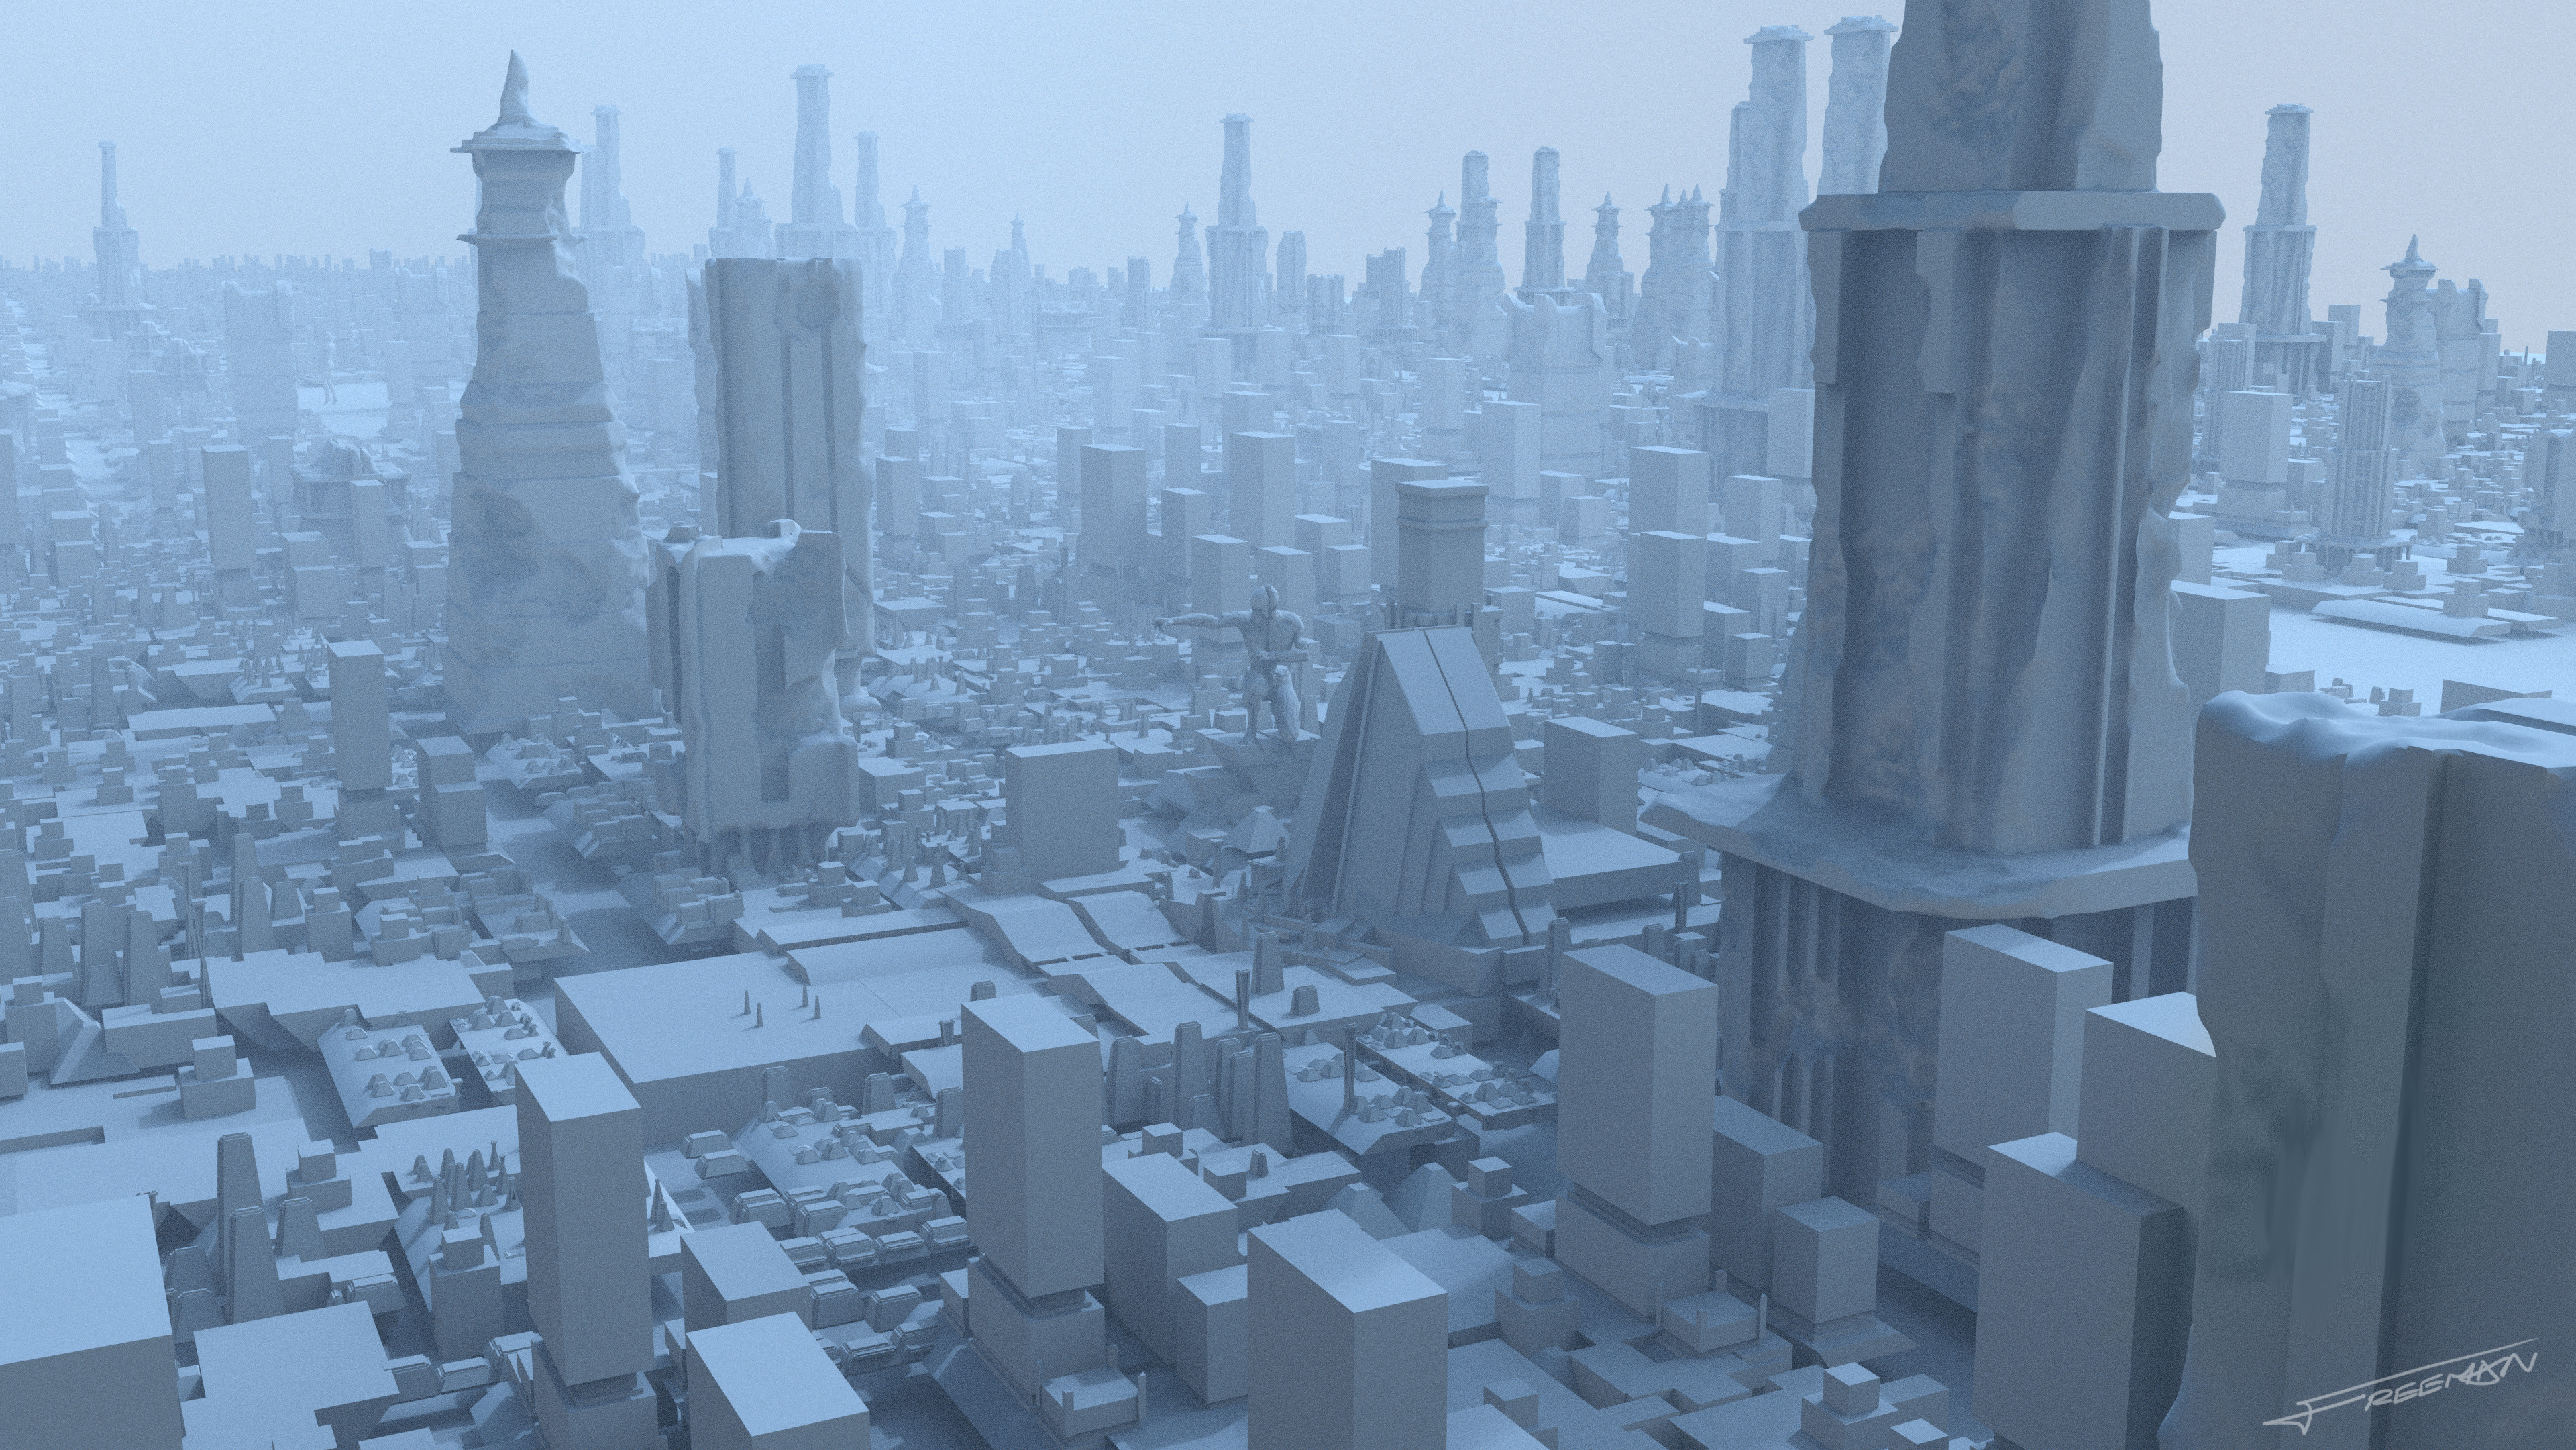 I built the city in 3D, including the use of lidar scans of the set in situ, so I could work with the clients to design the surrounding city and design it on a shot by shot basis.